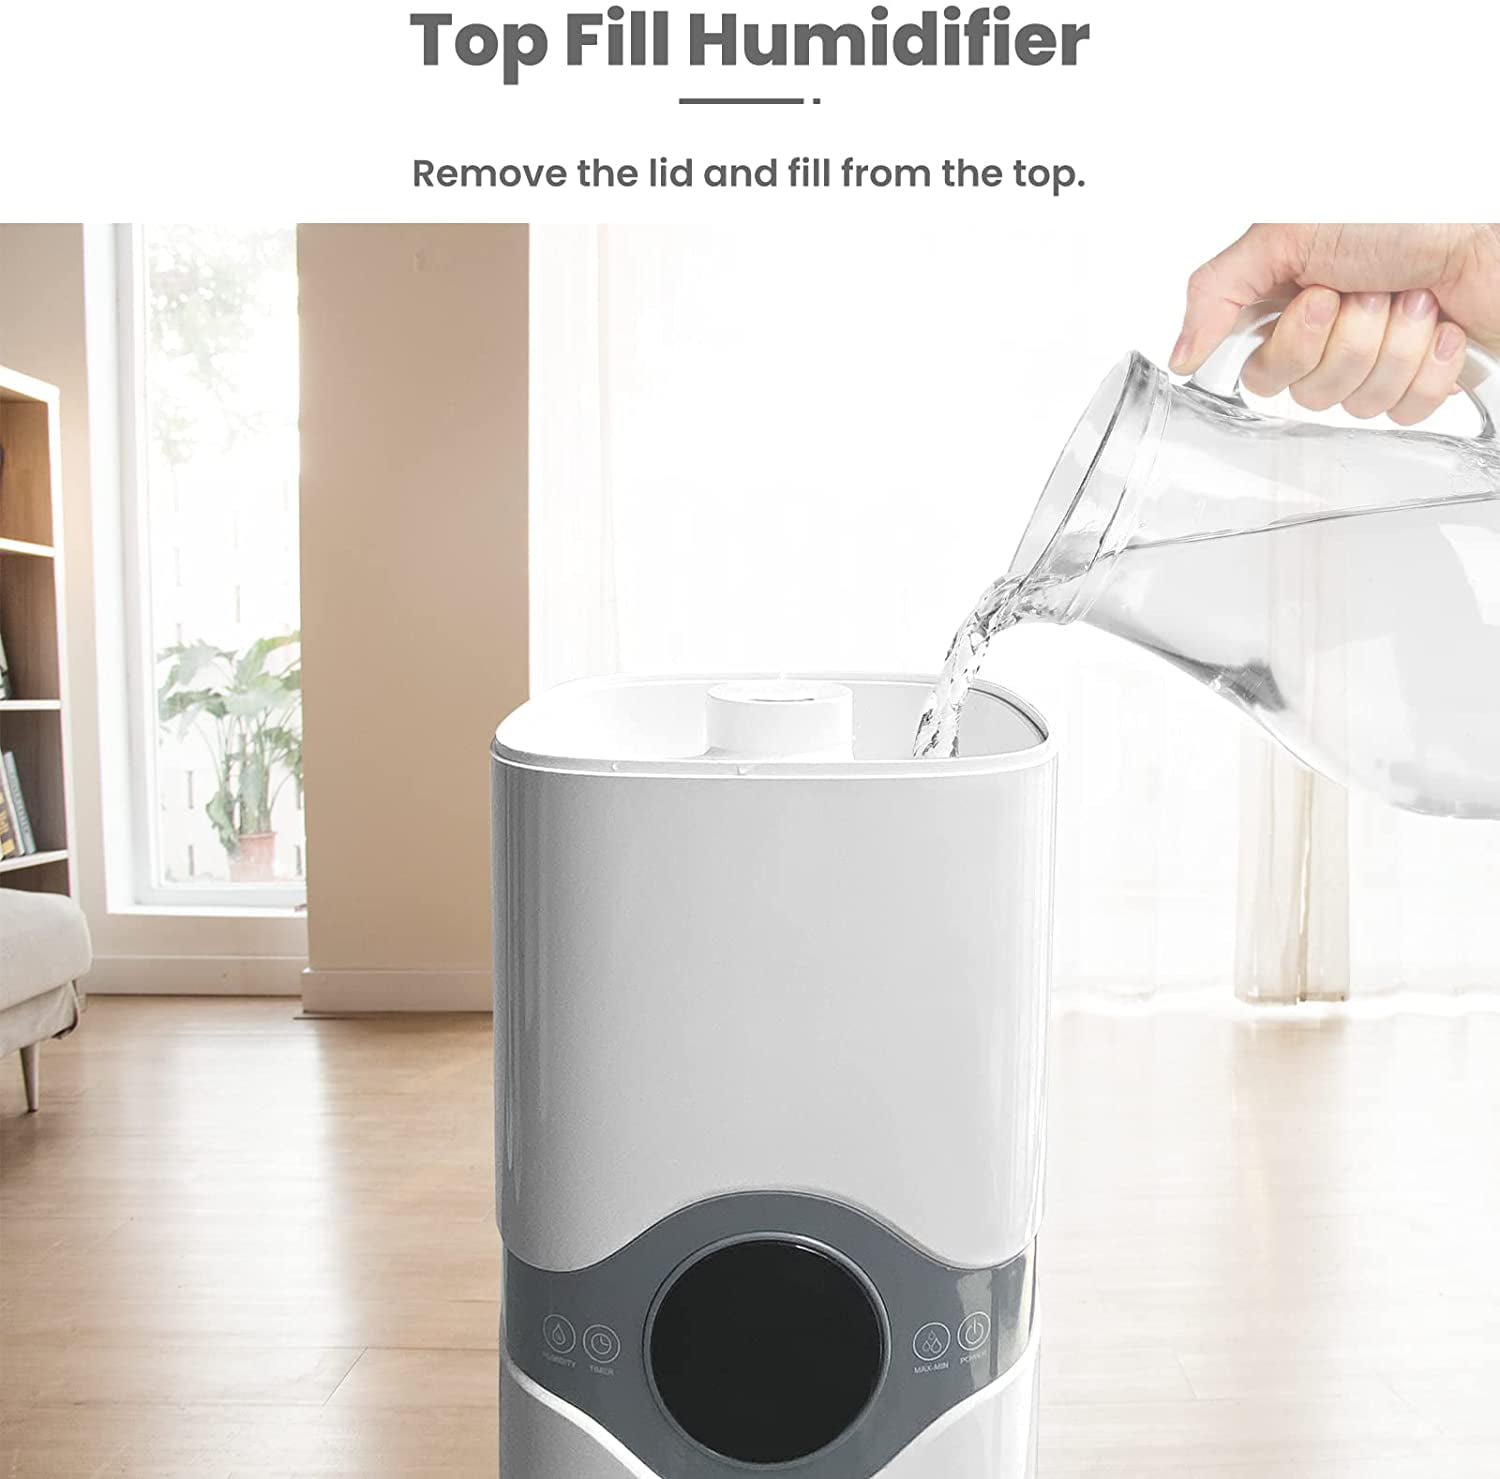 300ML/H Max Mist Output Top Fill Humidifiers with Humidistat Ultrasonic Humidifiers for Home 9L/2.3Gal Large Room Quiet Cool Mist Humidifiers of Large Capacity for 36H Humidifying